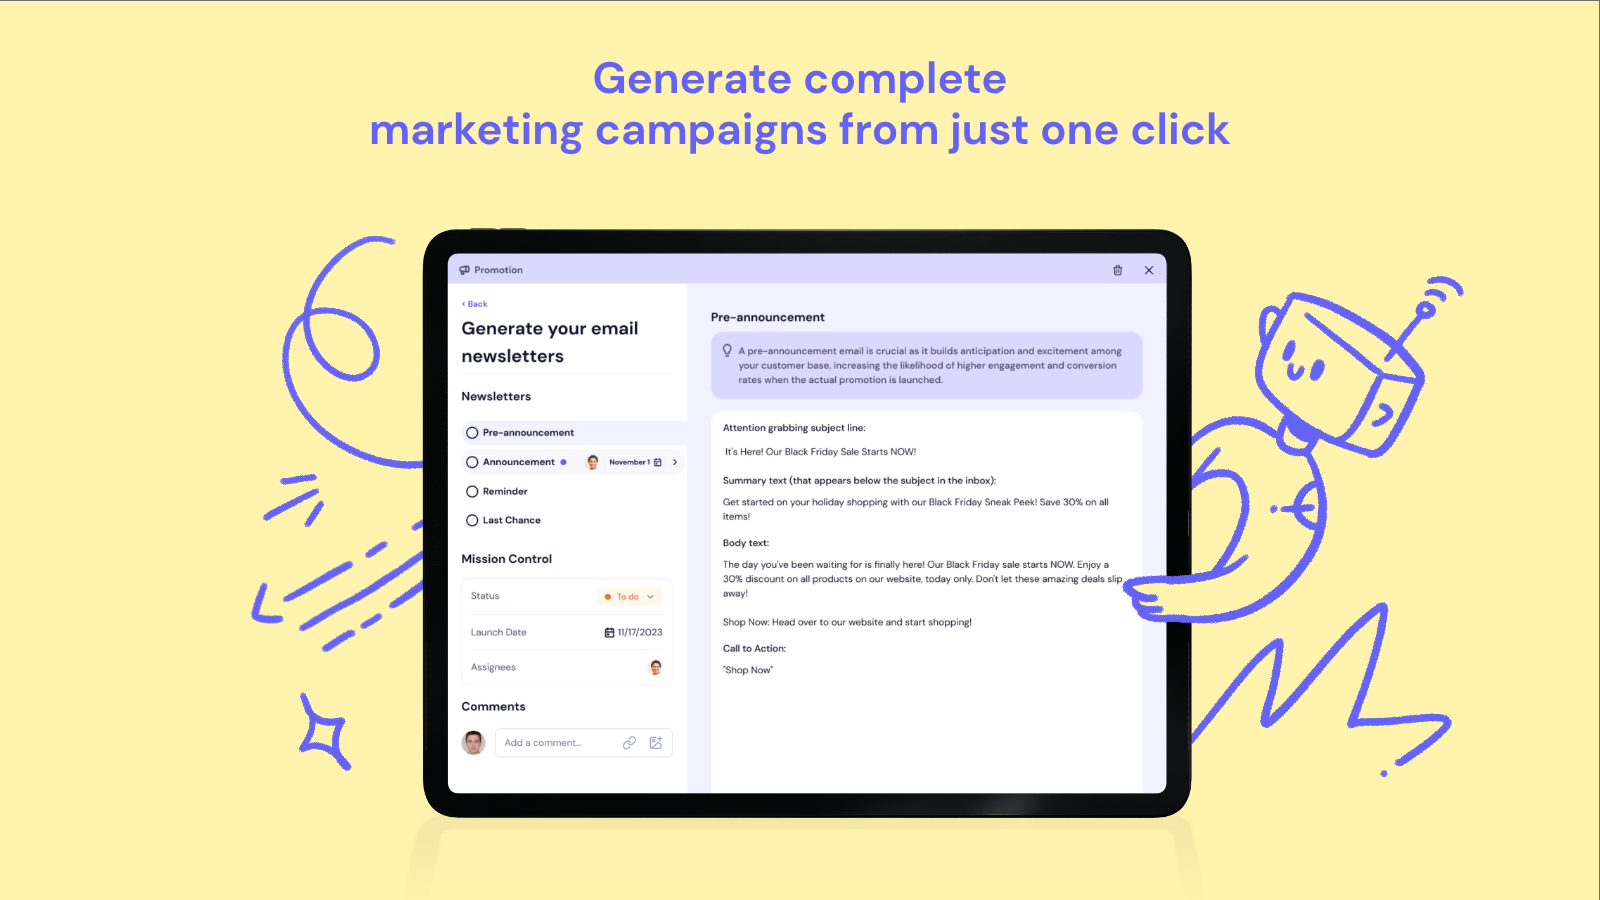 Generate complete marketing campaigns from just one click